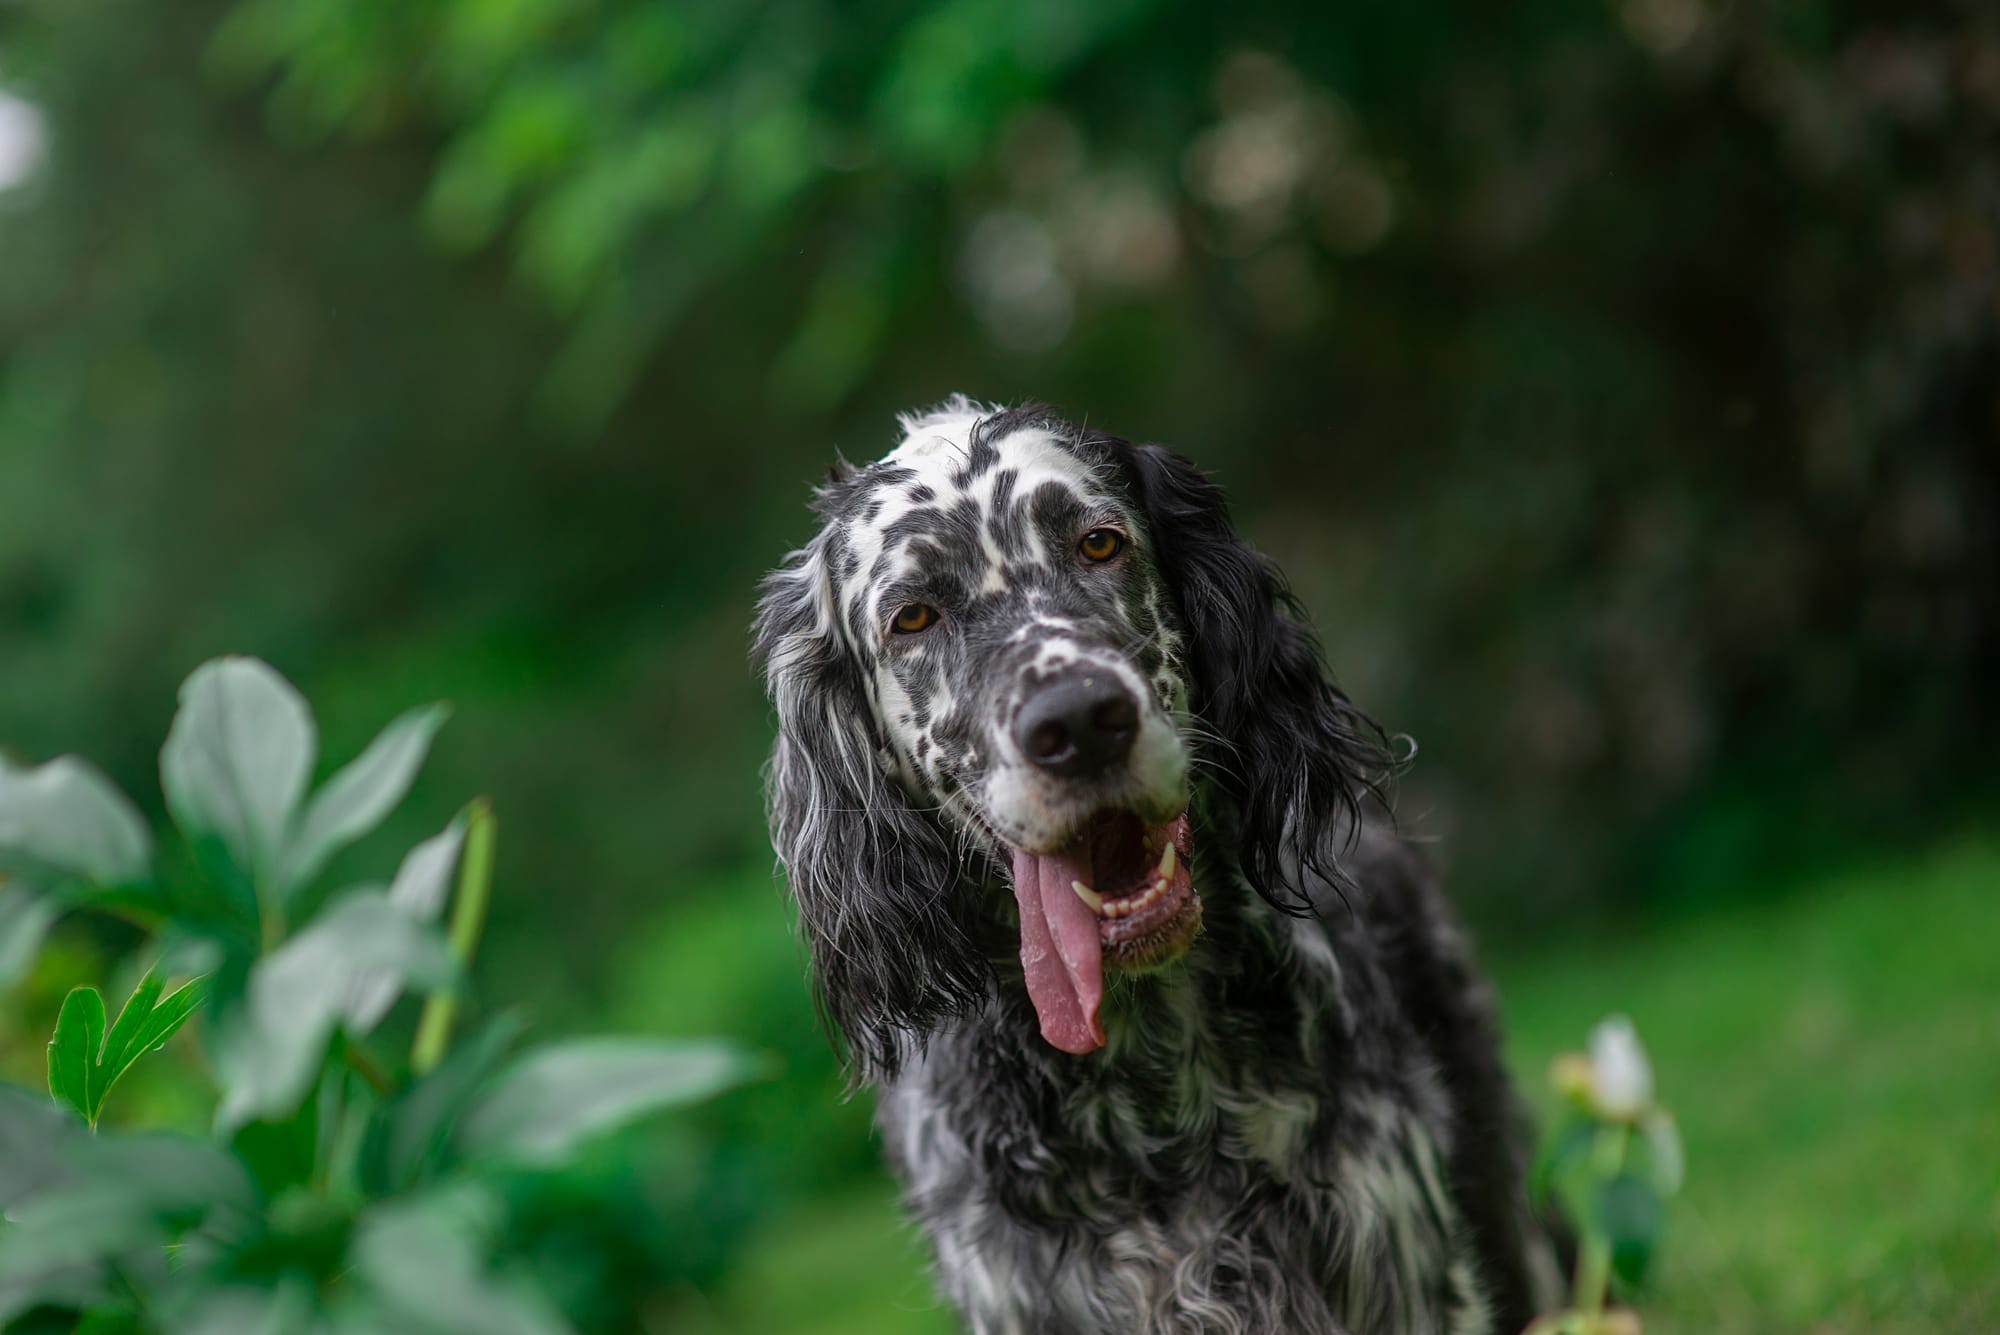 Can English Setters Live in Apartments